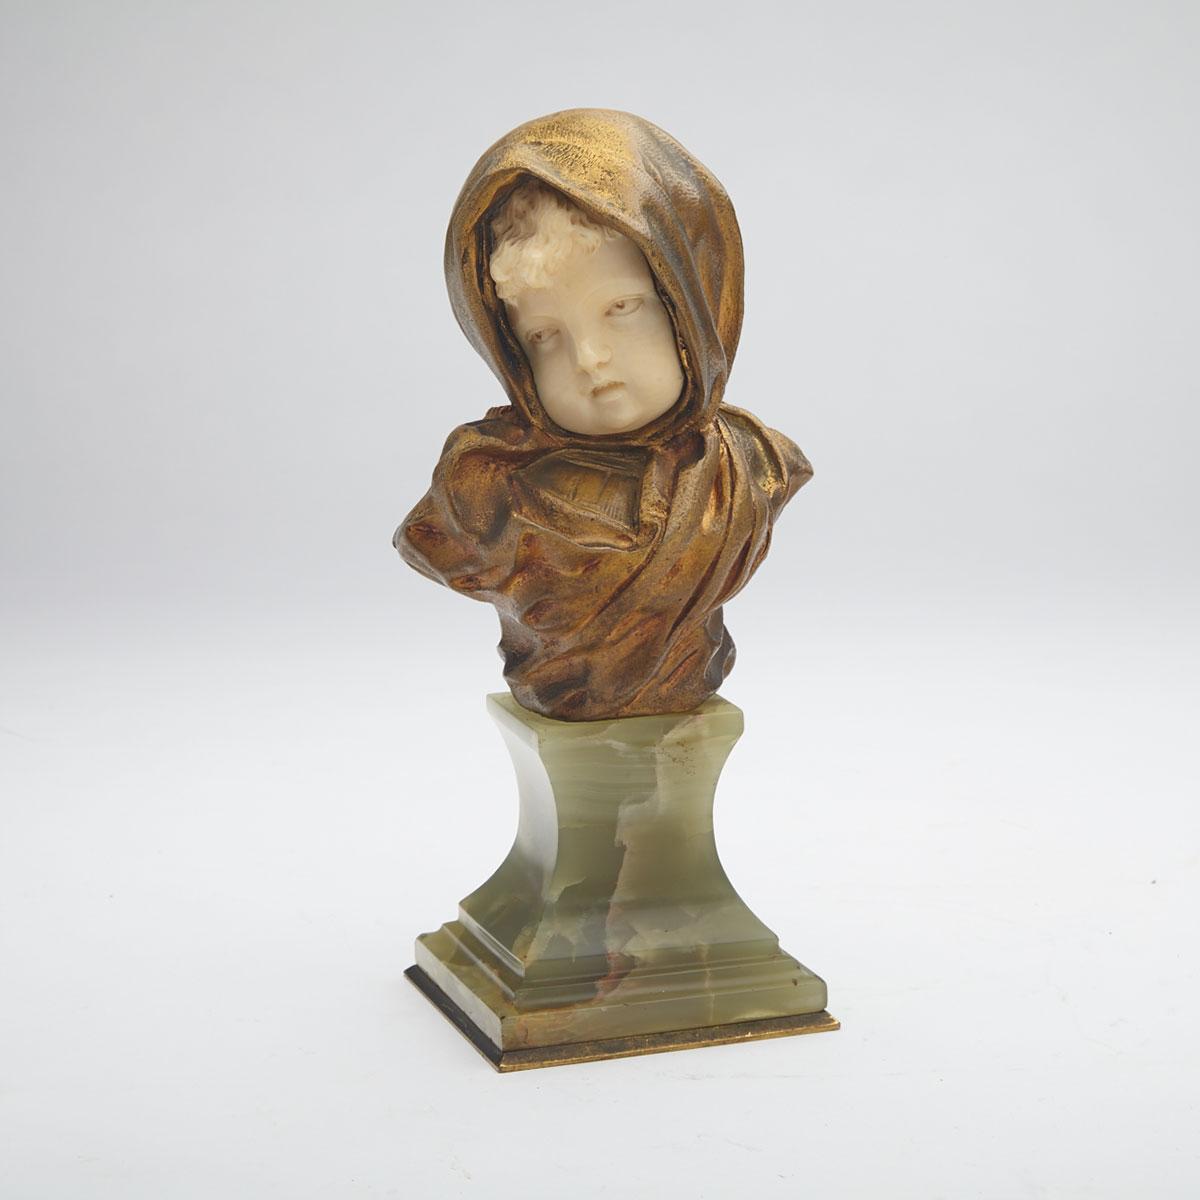 Small French Bronze and Ivory Bust of a Young Girl, G. de Thouin, 19th century